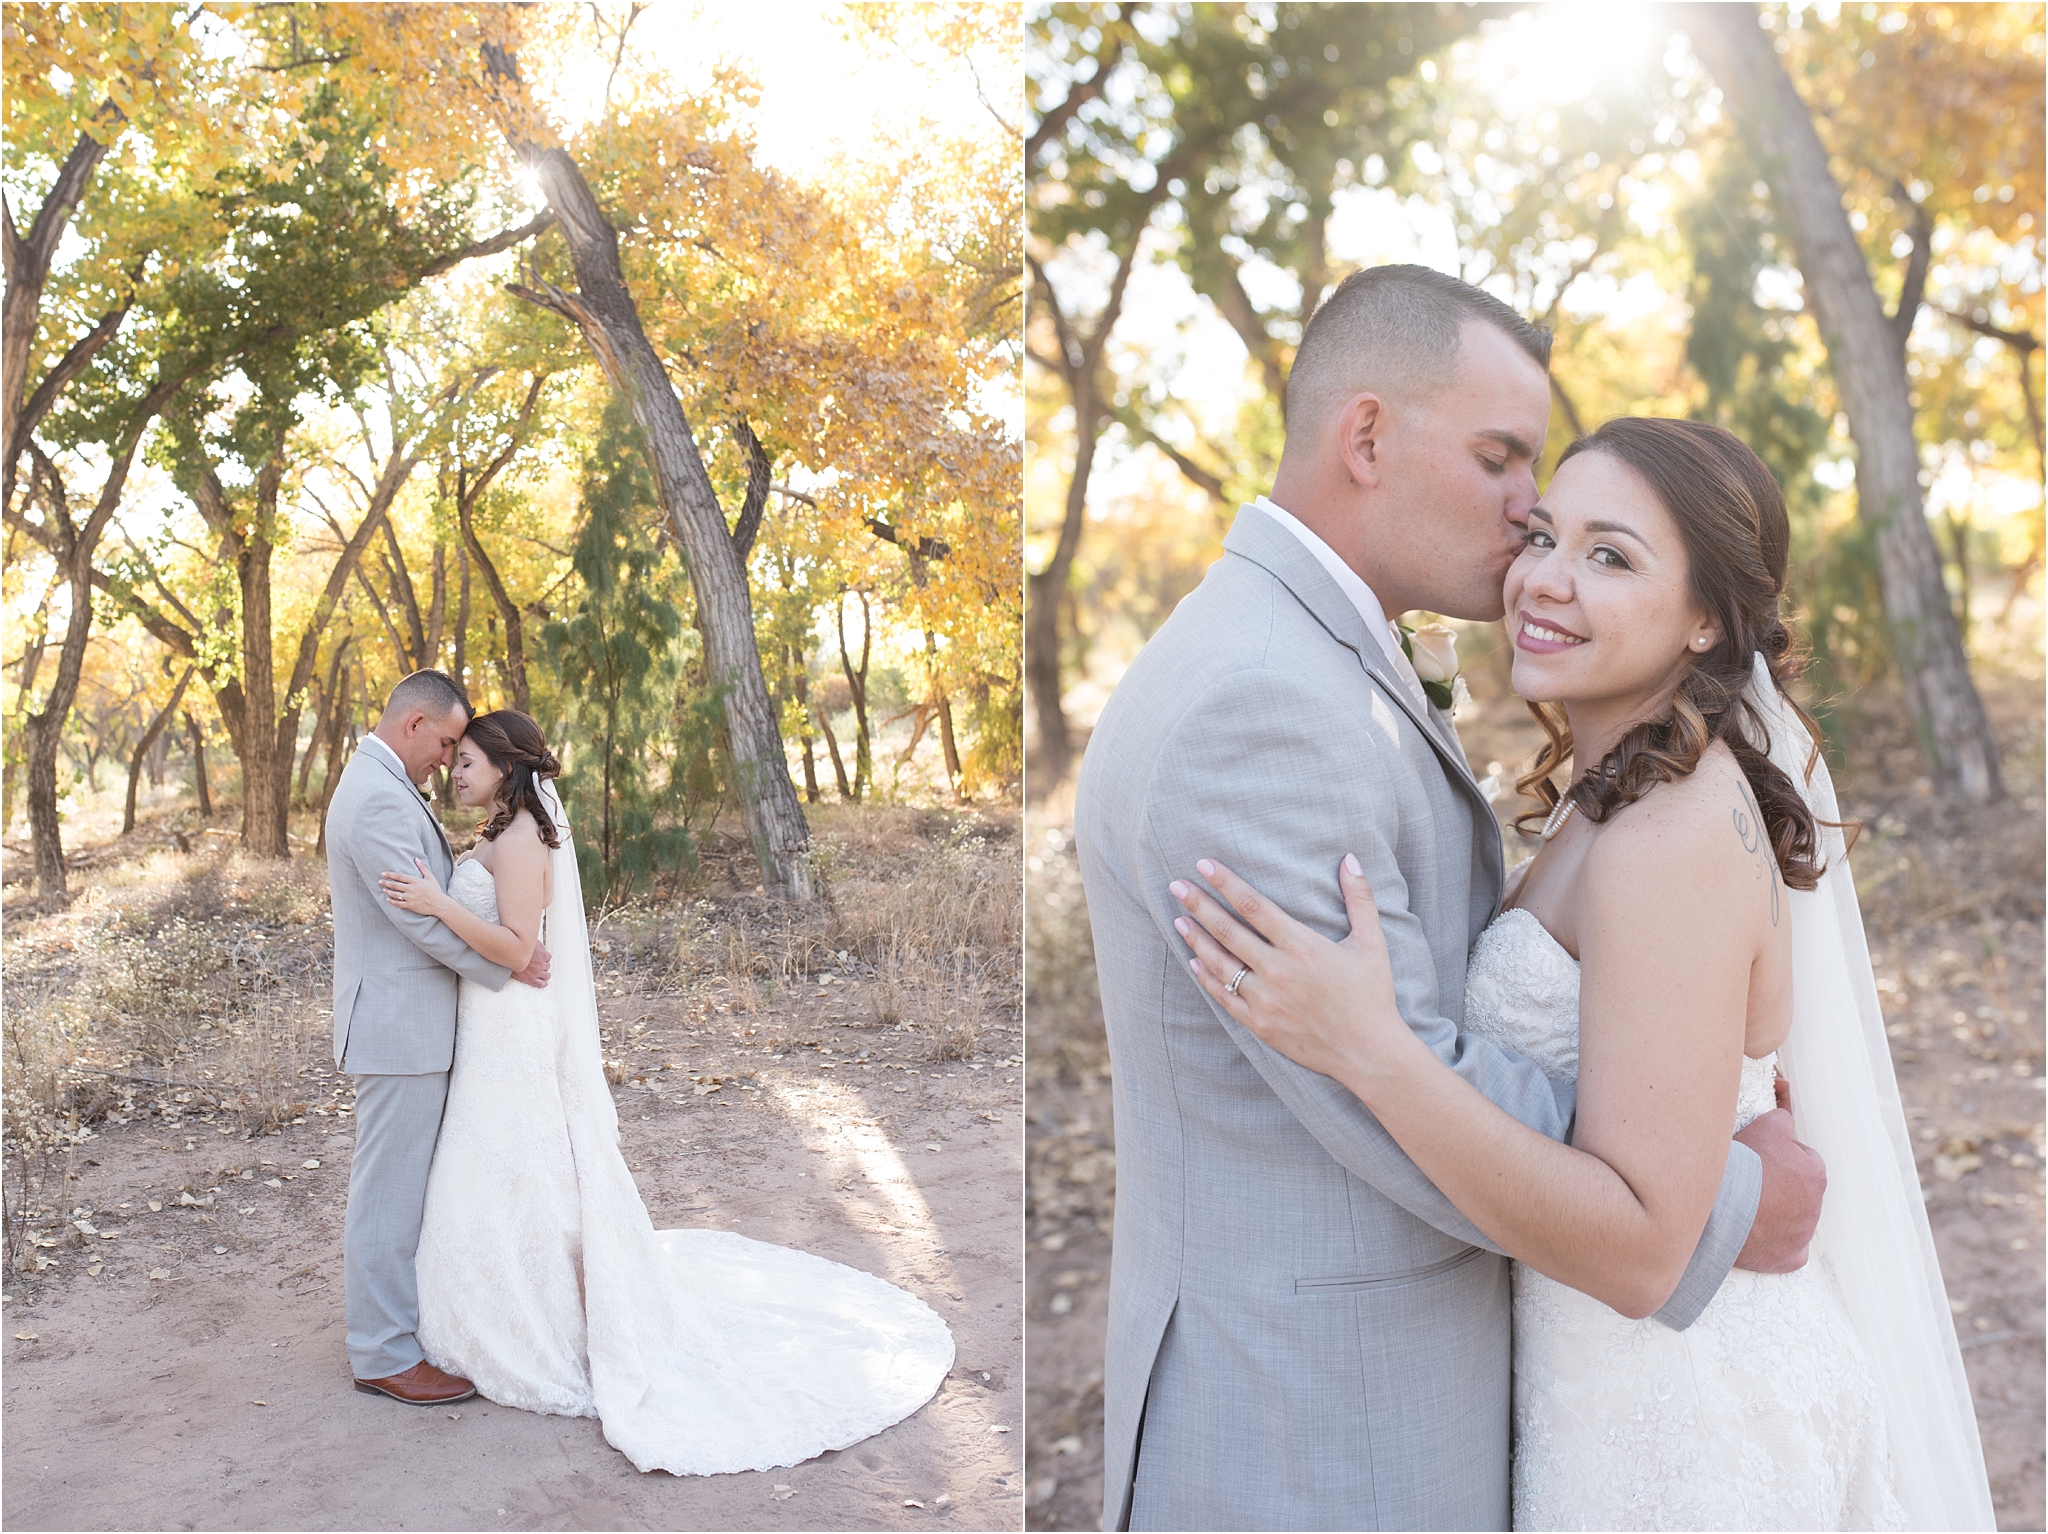 kayla kitts photography - albuquerque wedding photographer - hairpins and scissors - a cake odyssey - new mexico wedding photographer_0045.jpg